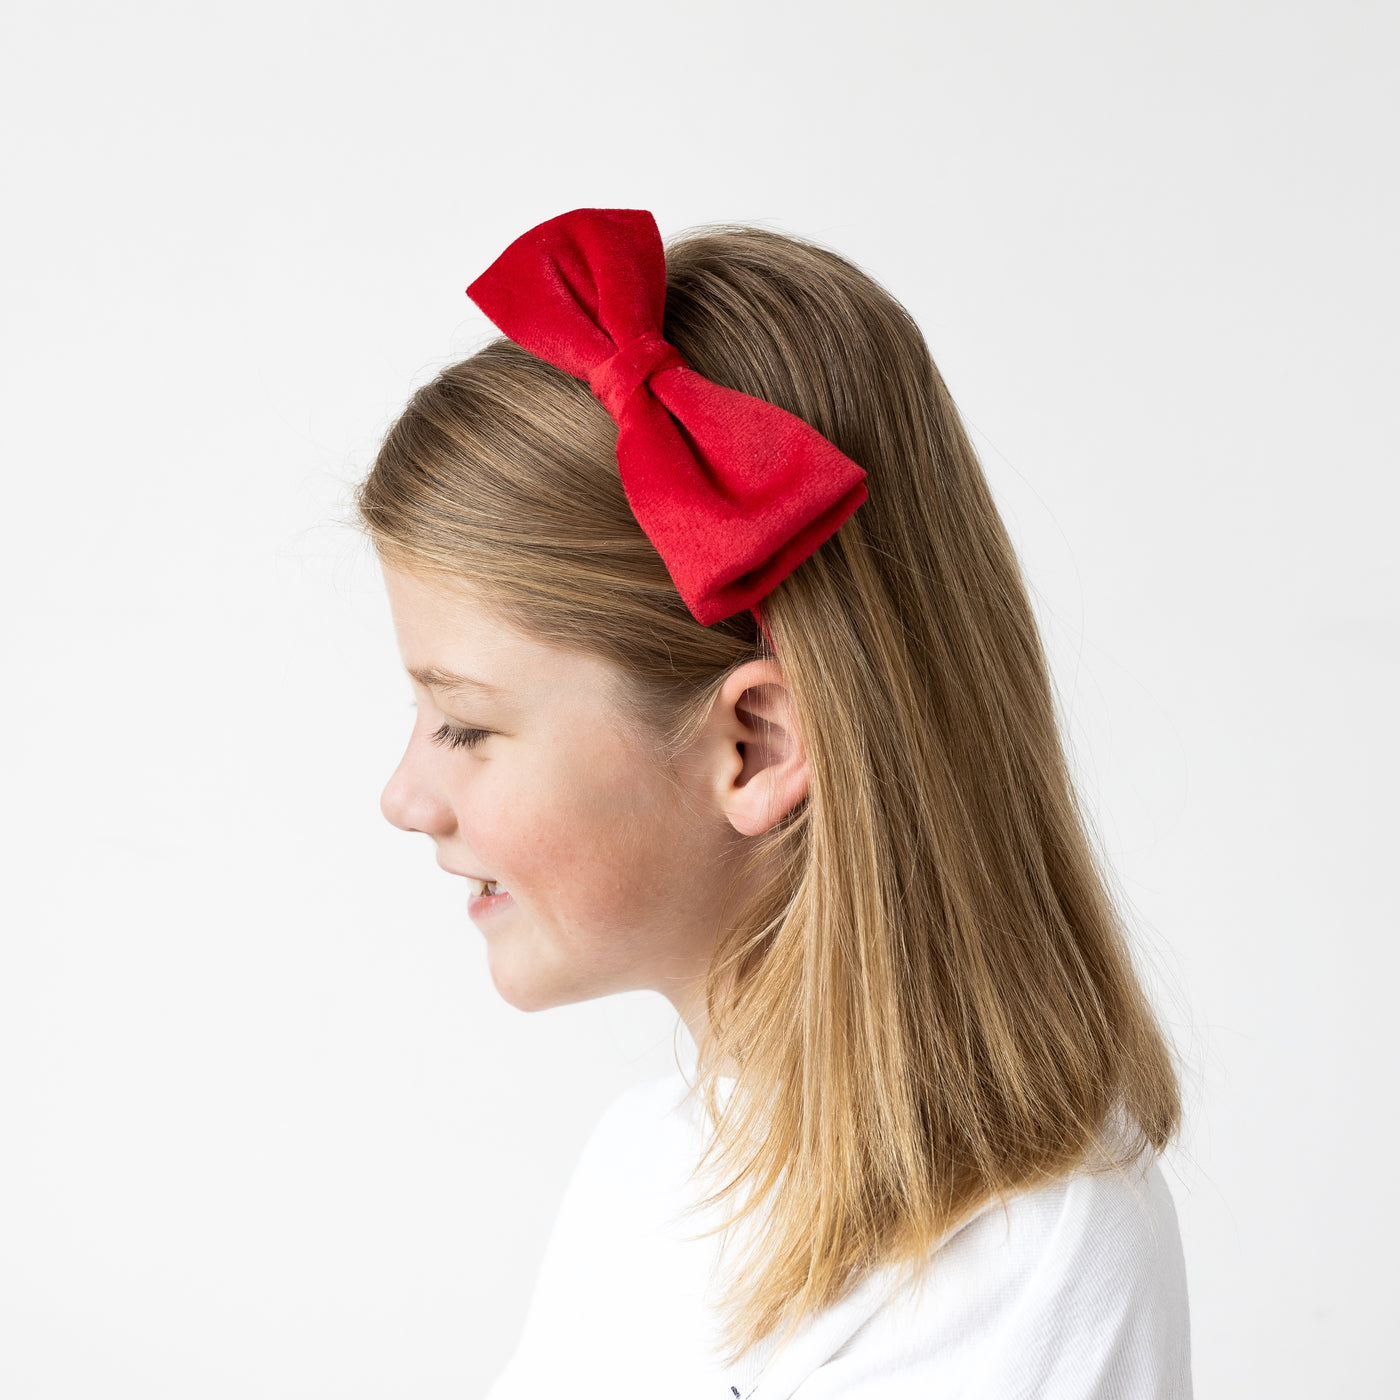 Close up image of a red velvet bow Alice band worn by a dark blonde little girl